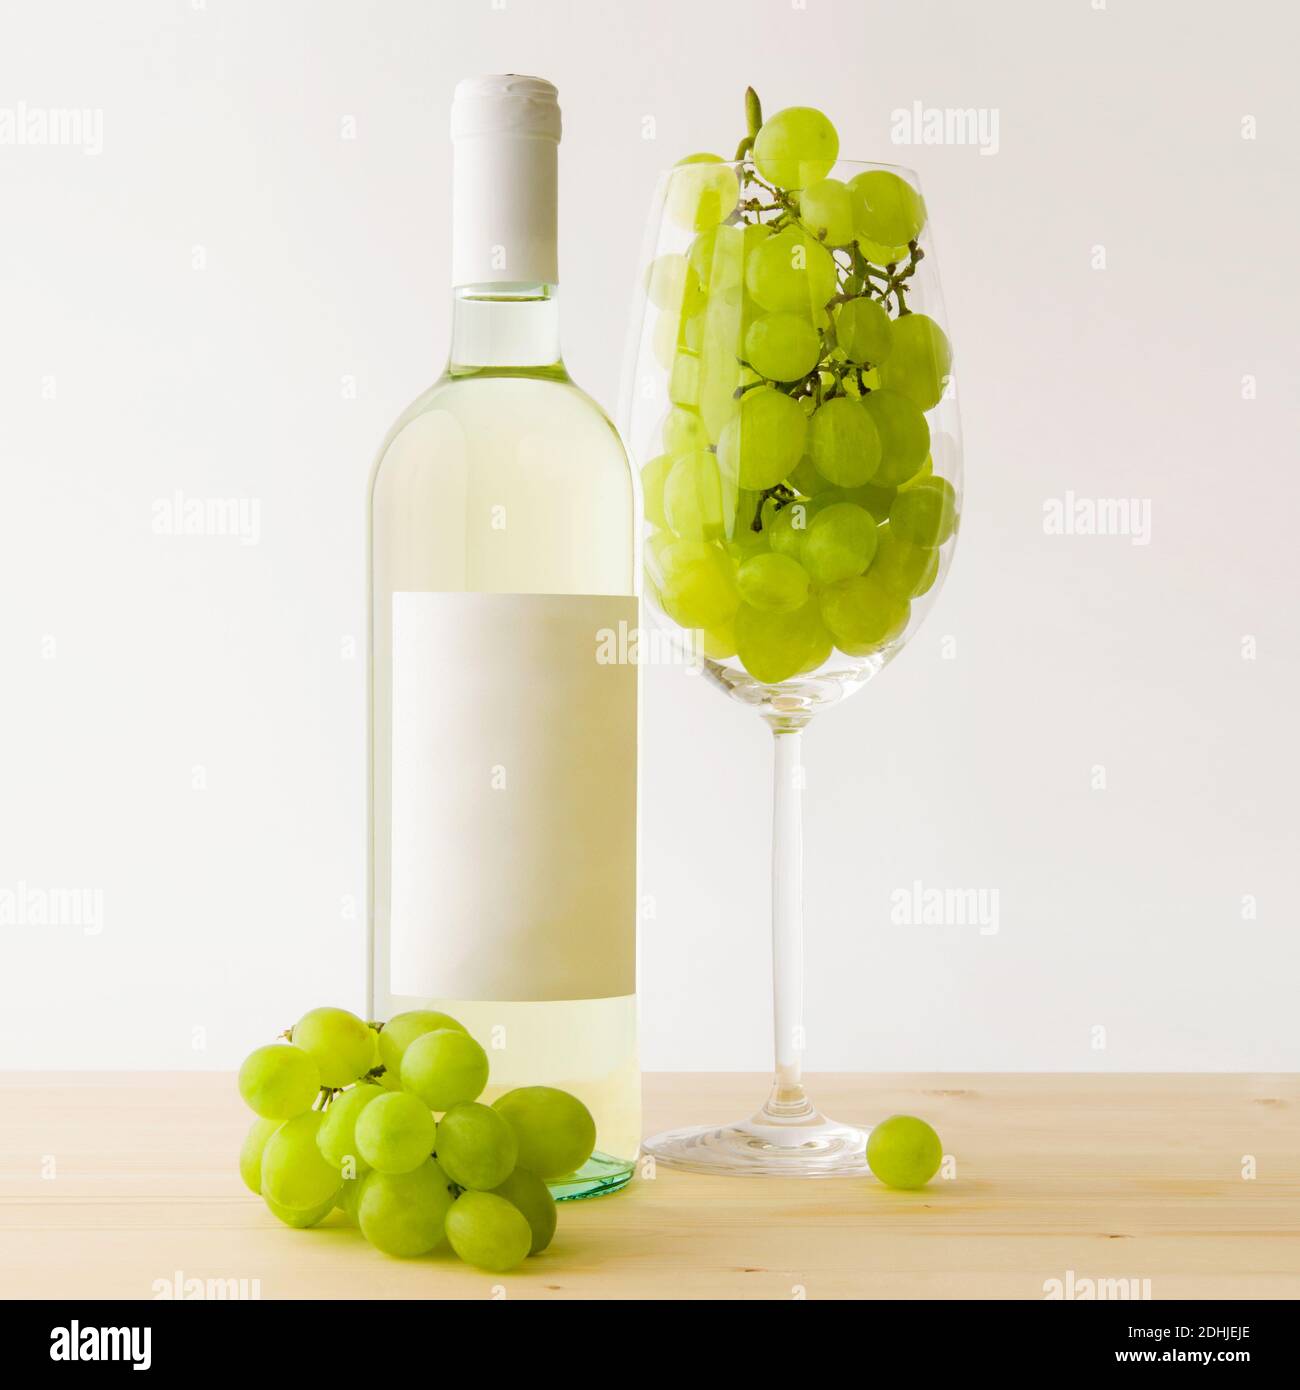 Bottle of white wine with anonymous label and a large and transparent glass goblet filled with grapes Stock Photo